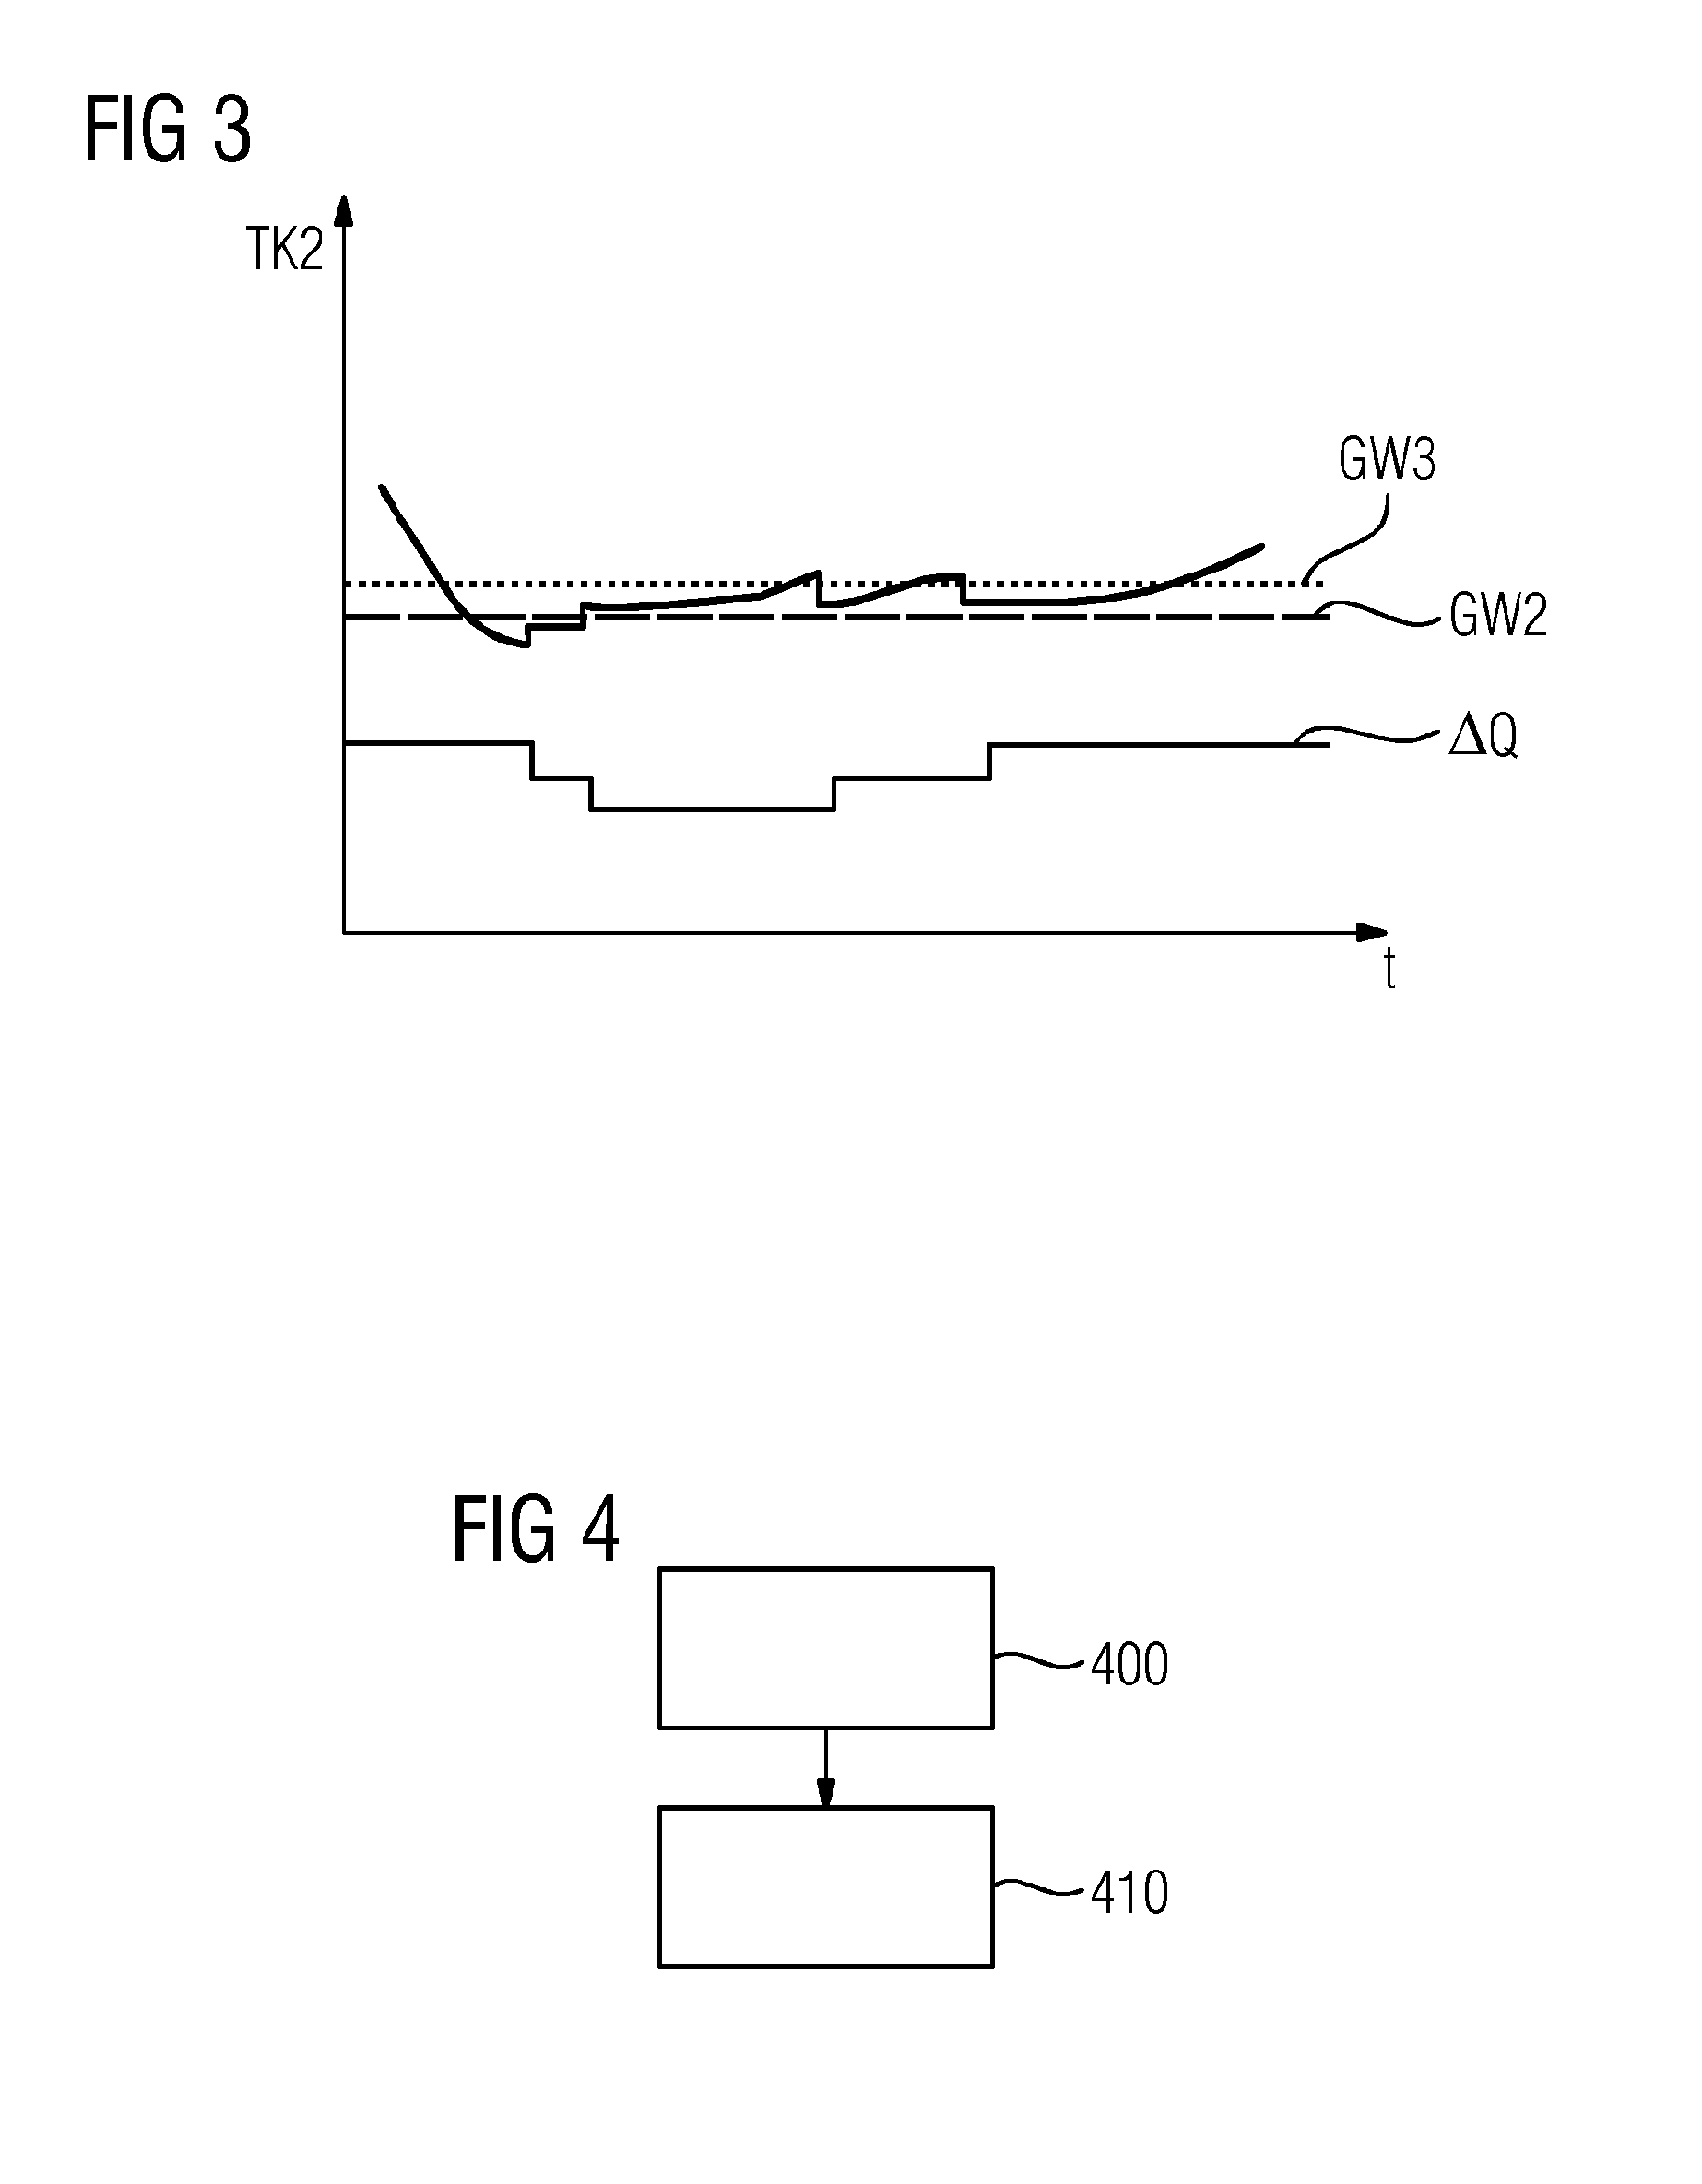 Partial-load operation of a gas turbine with an adjustable bypass flow channel